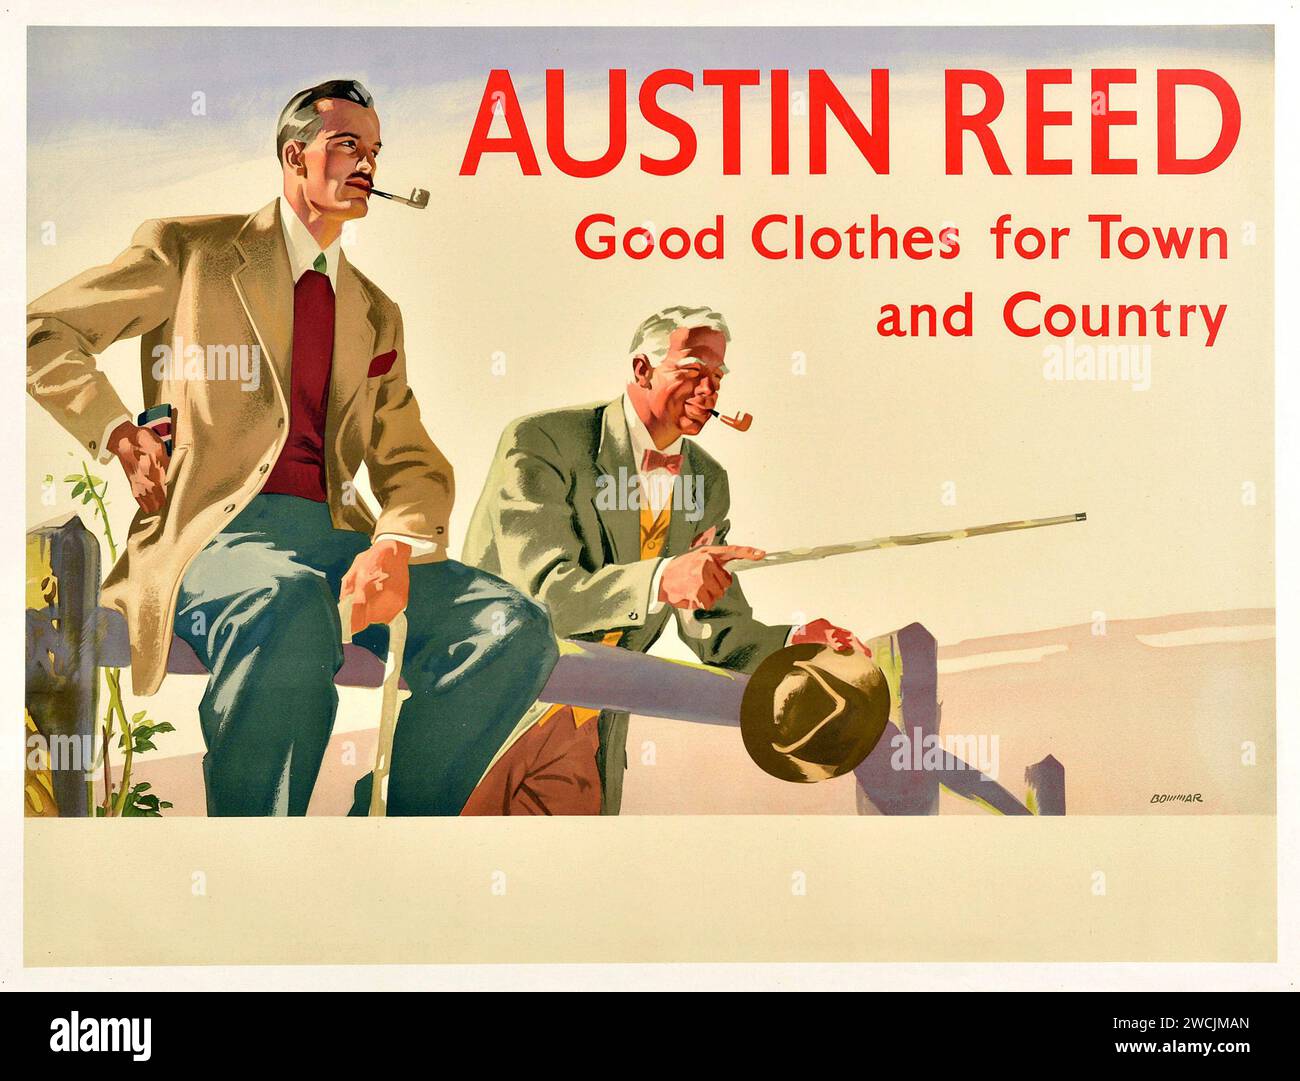 Vintage Fashion Advertising Poster Austin Reed Good Clothes - advertising poster - unknown artist - 1930s poster - British poster Stock Photo